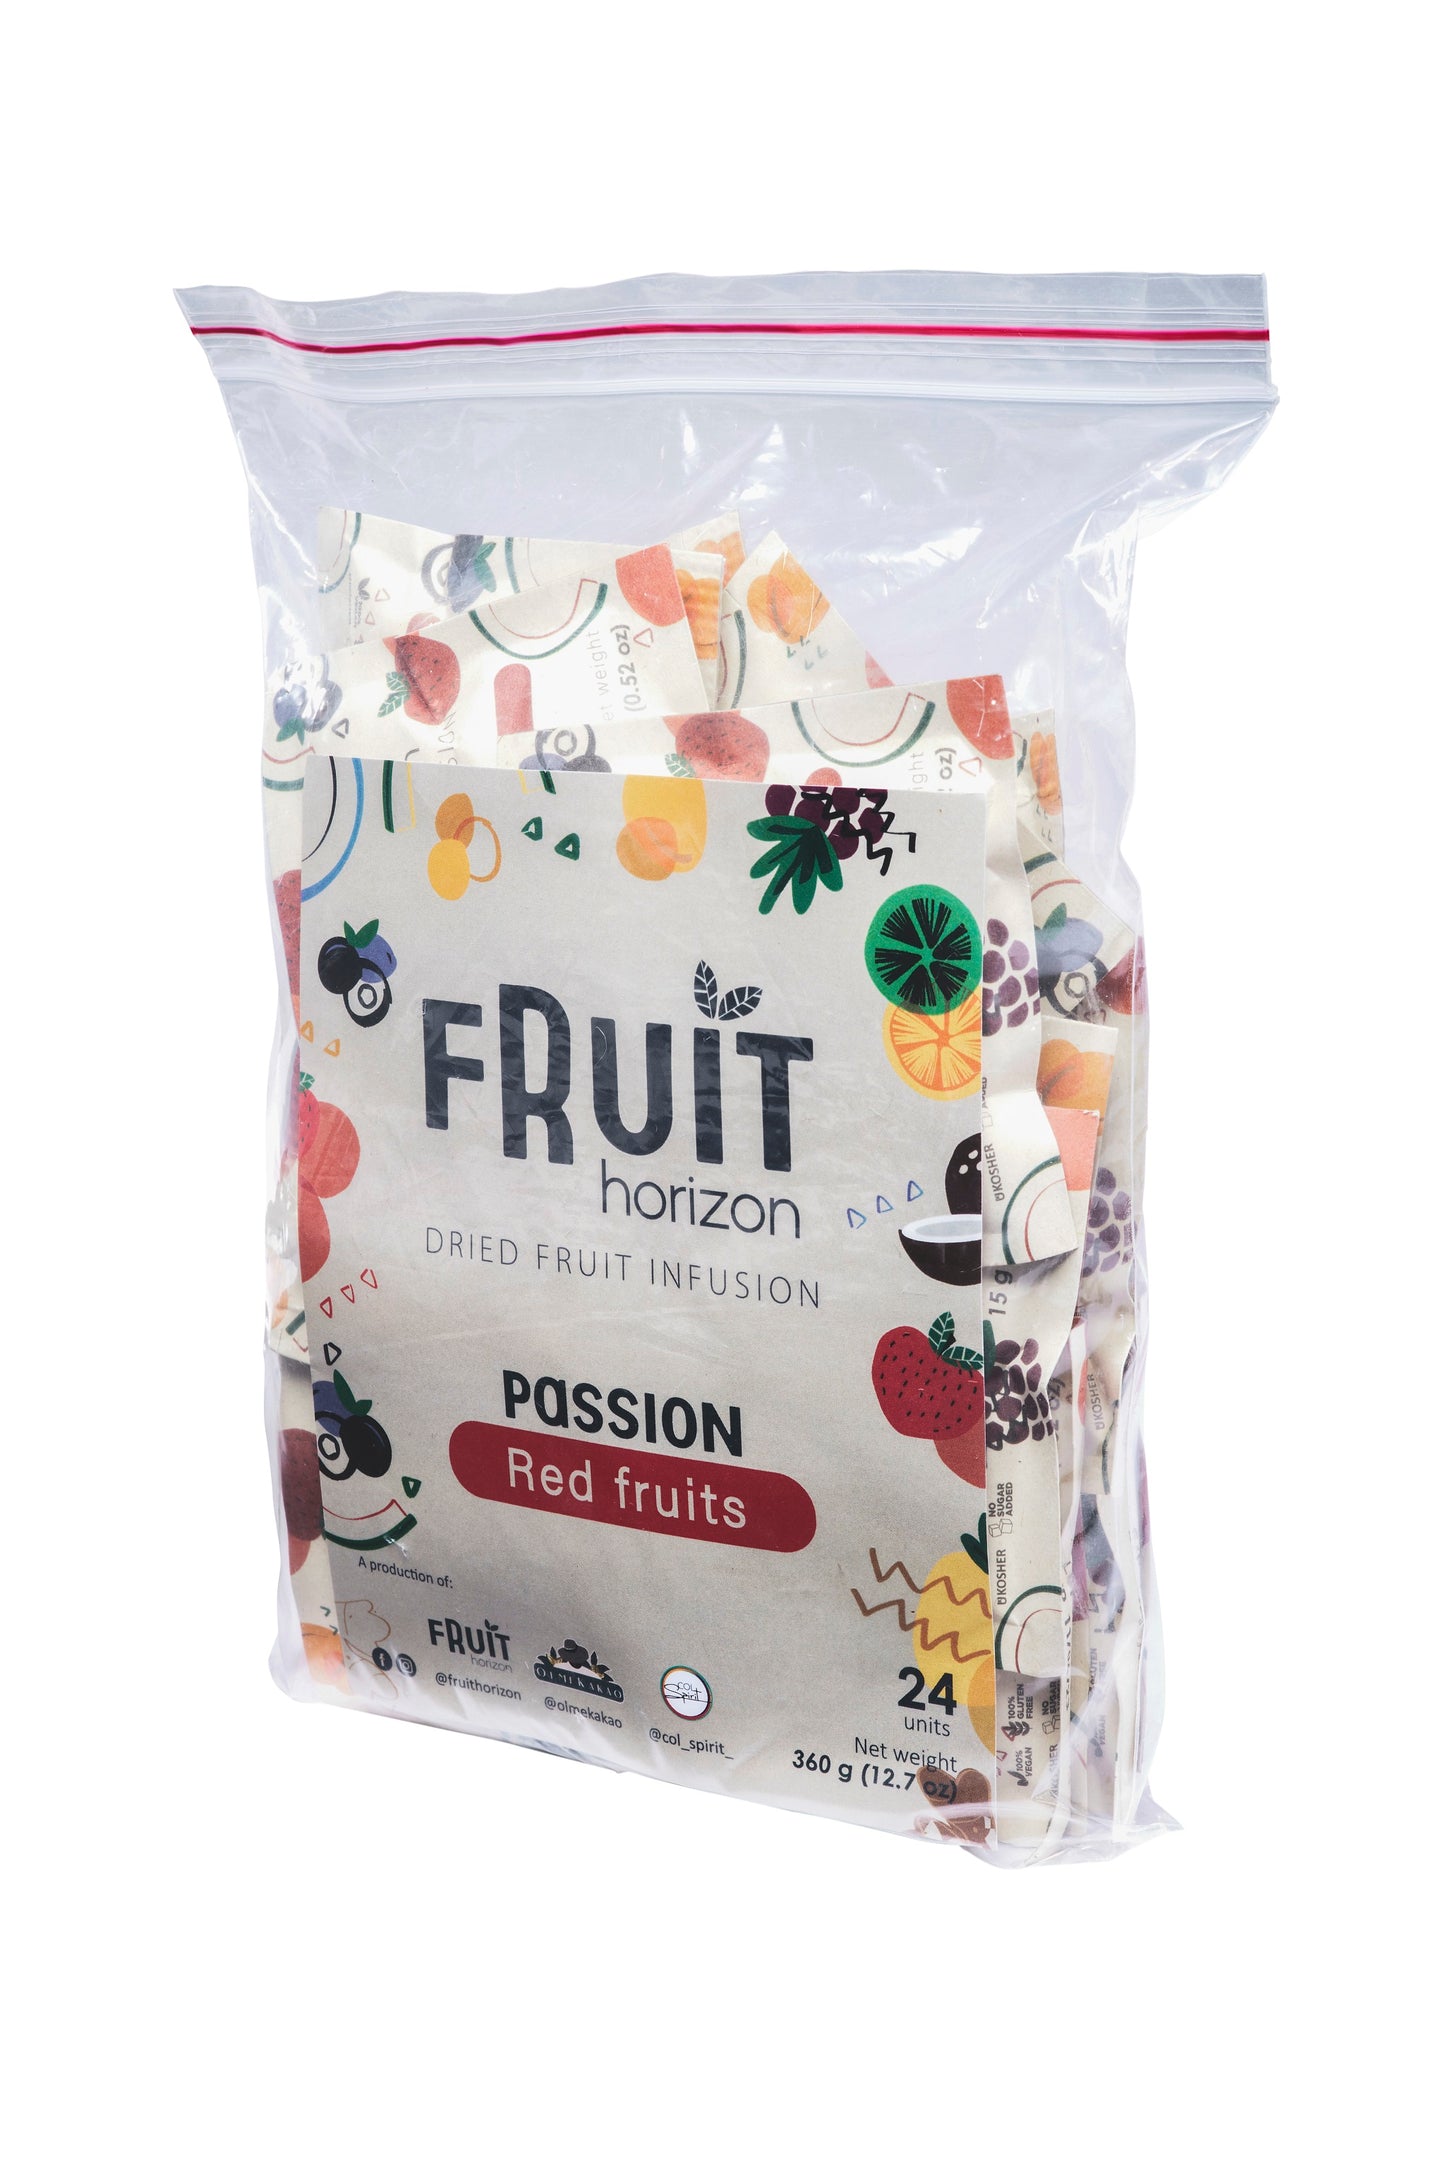 Fruit Horizon Fruit Infusion "Passion" 24 pieces (refill pack for gift box)